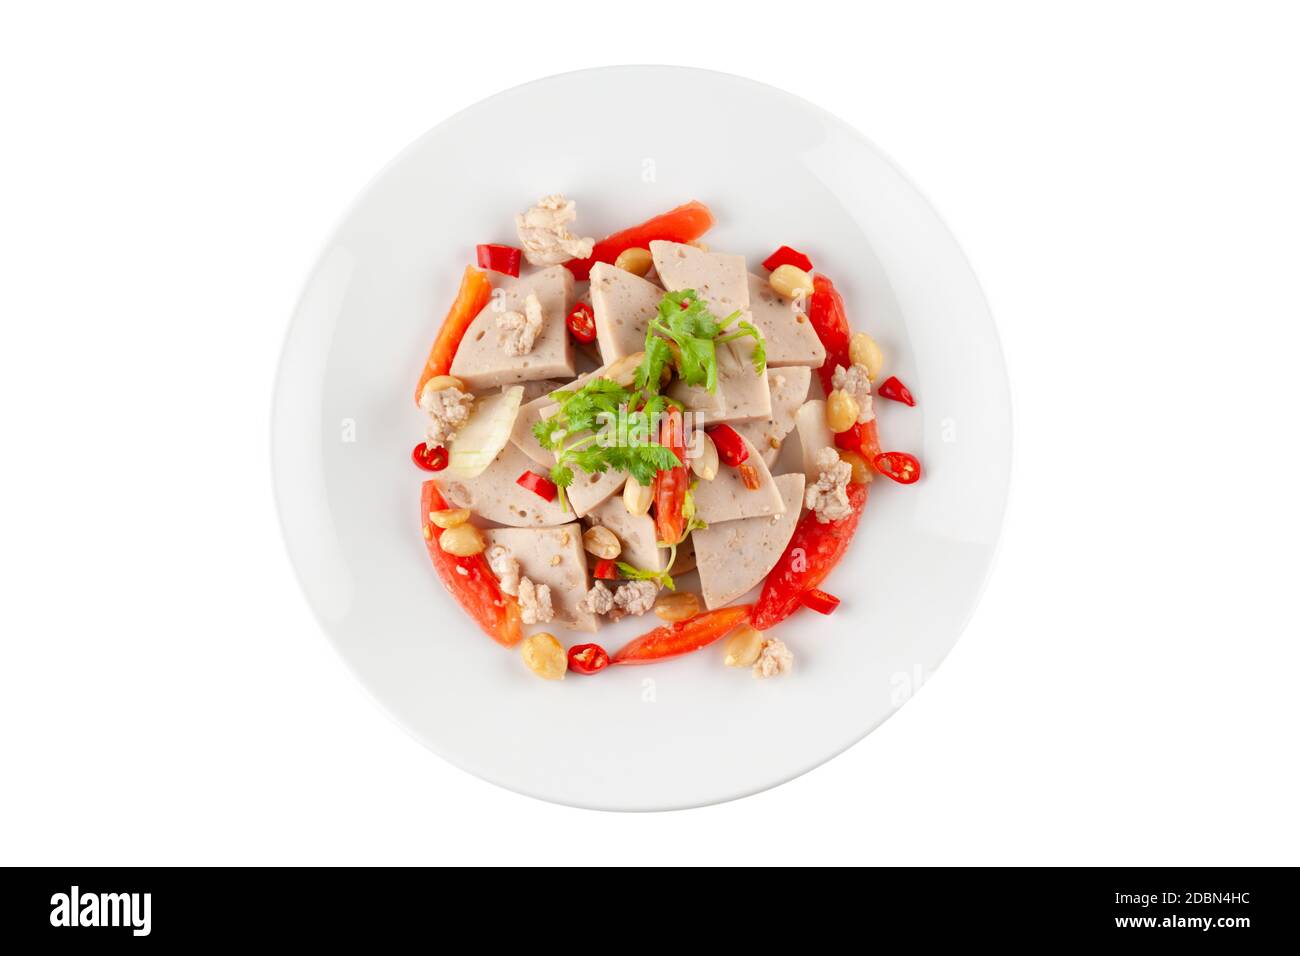 Spicy Vietnamese Sausage Salad on white ceramic plate isolated on white background with clipping path Stock Photo